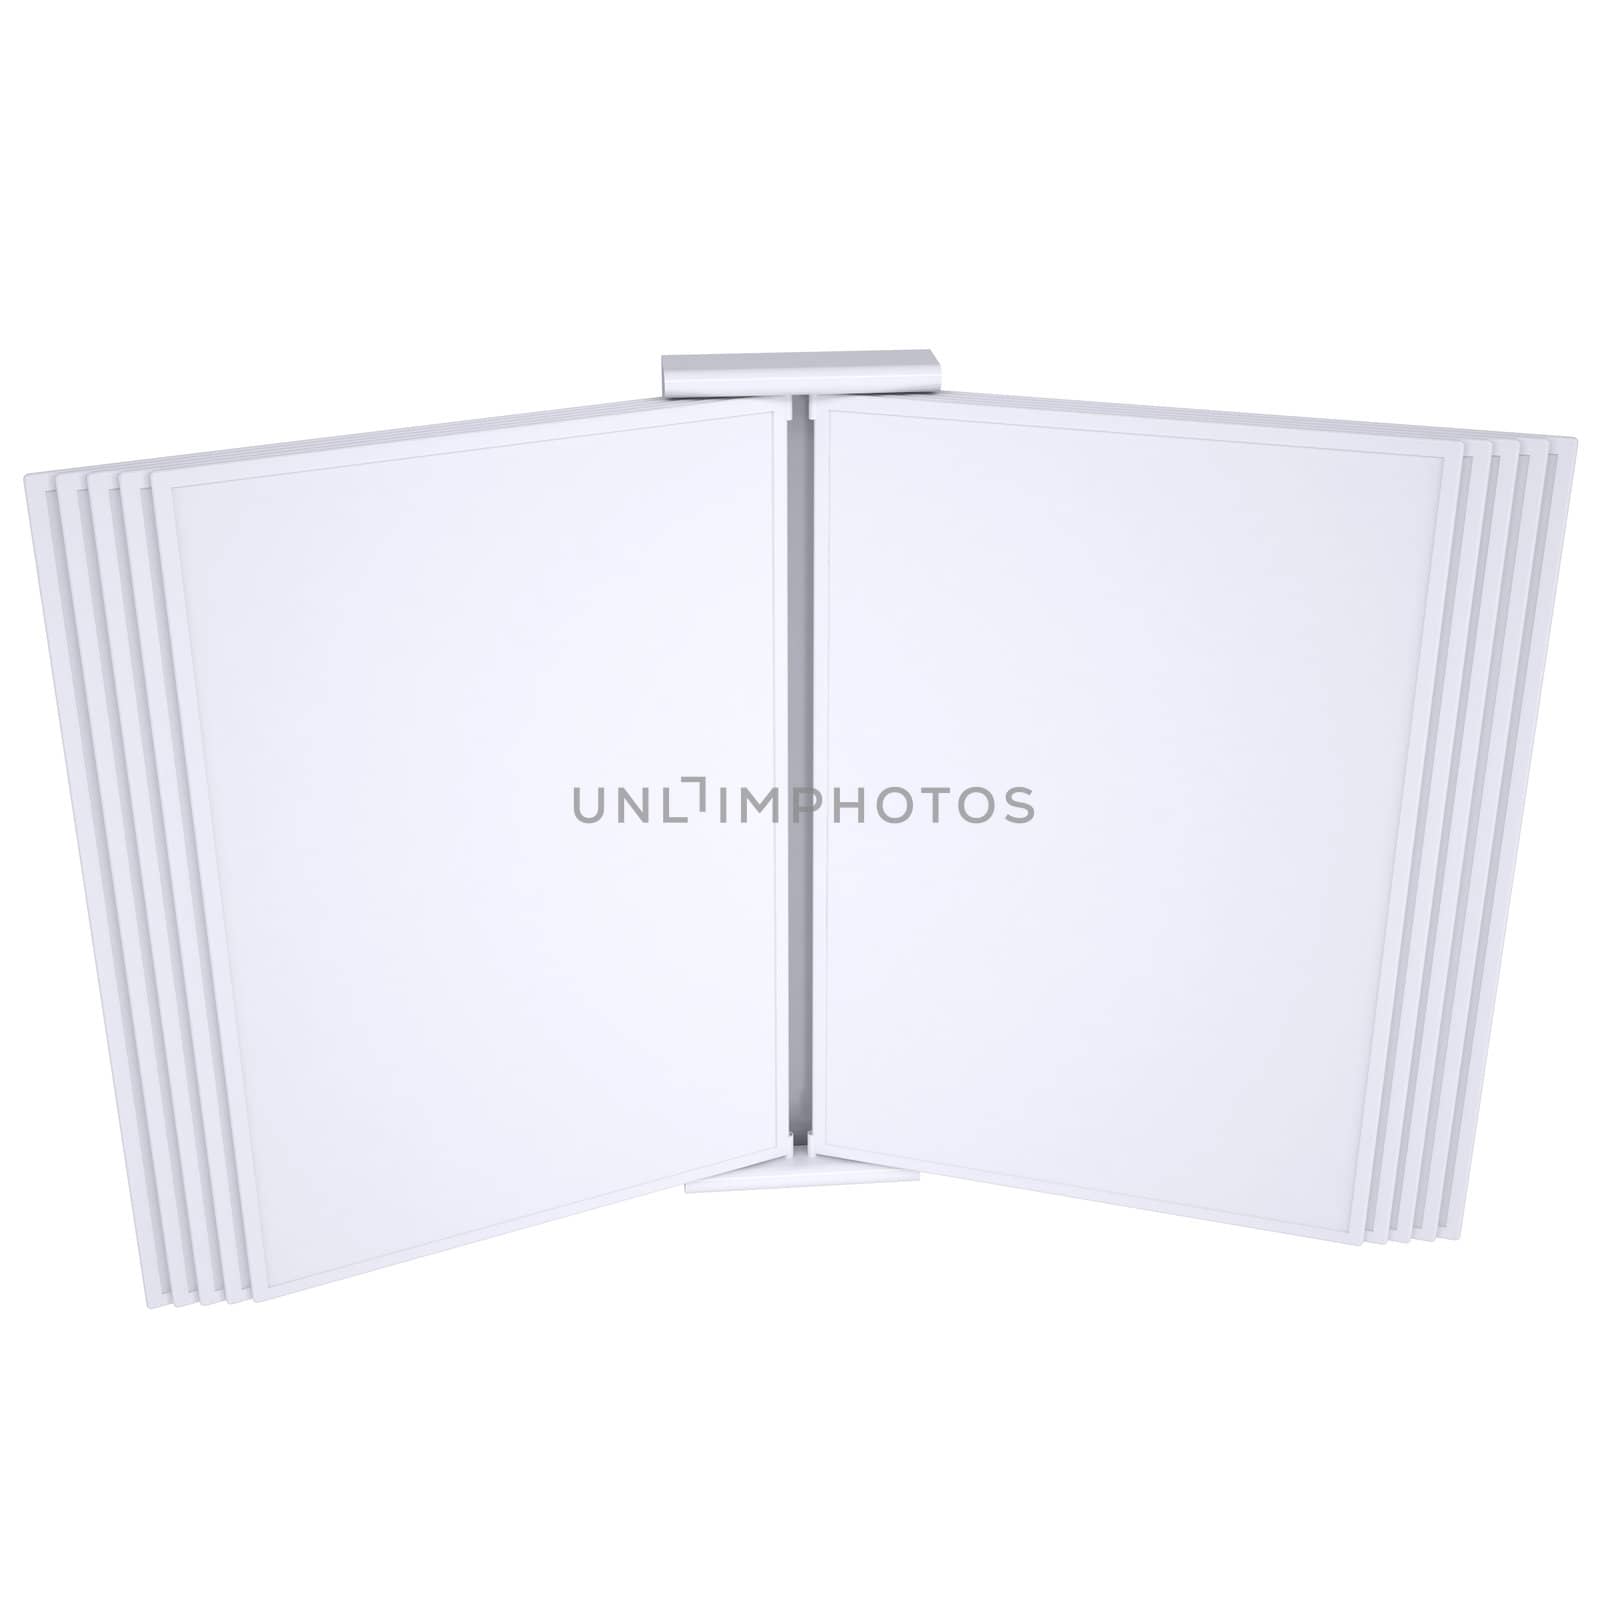 Advertising element to turn the page. Isolated render on a white background